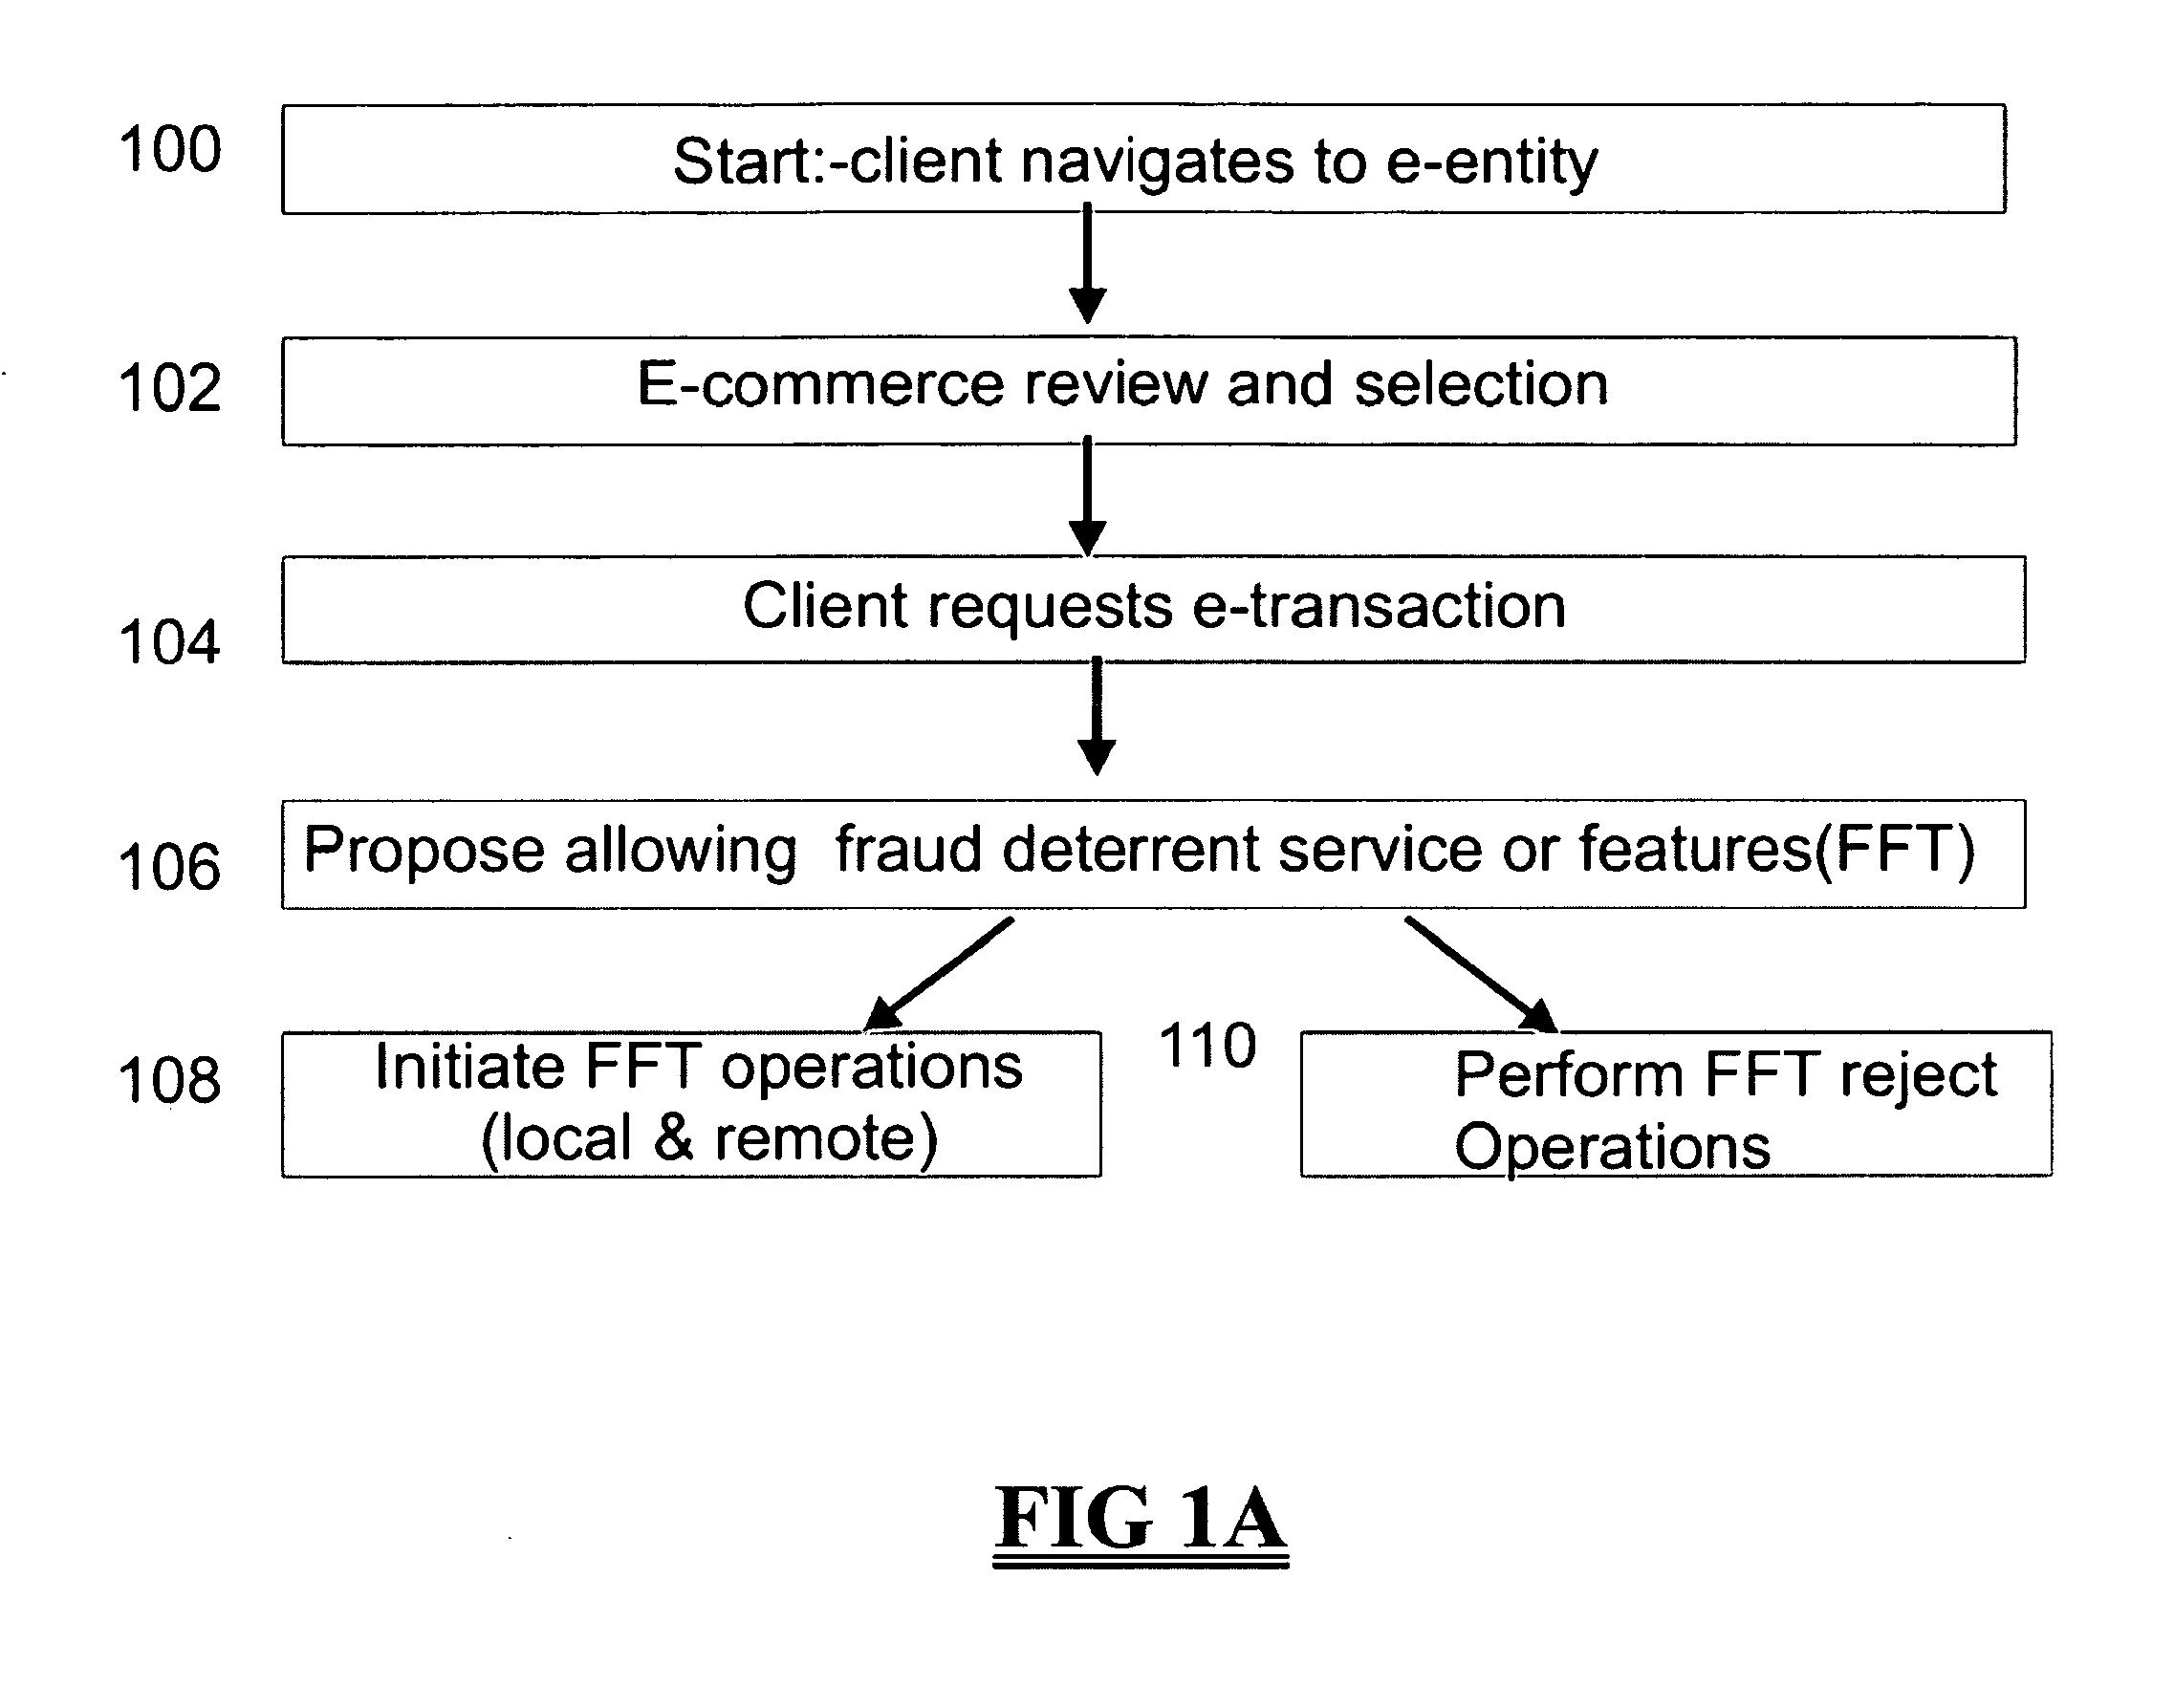 Systems and methods for facilitating electronic transactions and deterring fraud